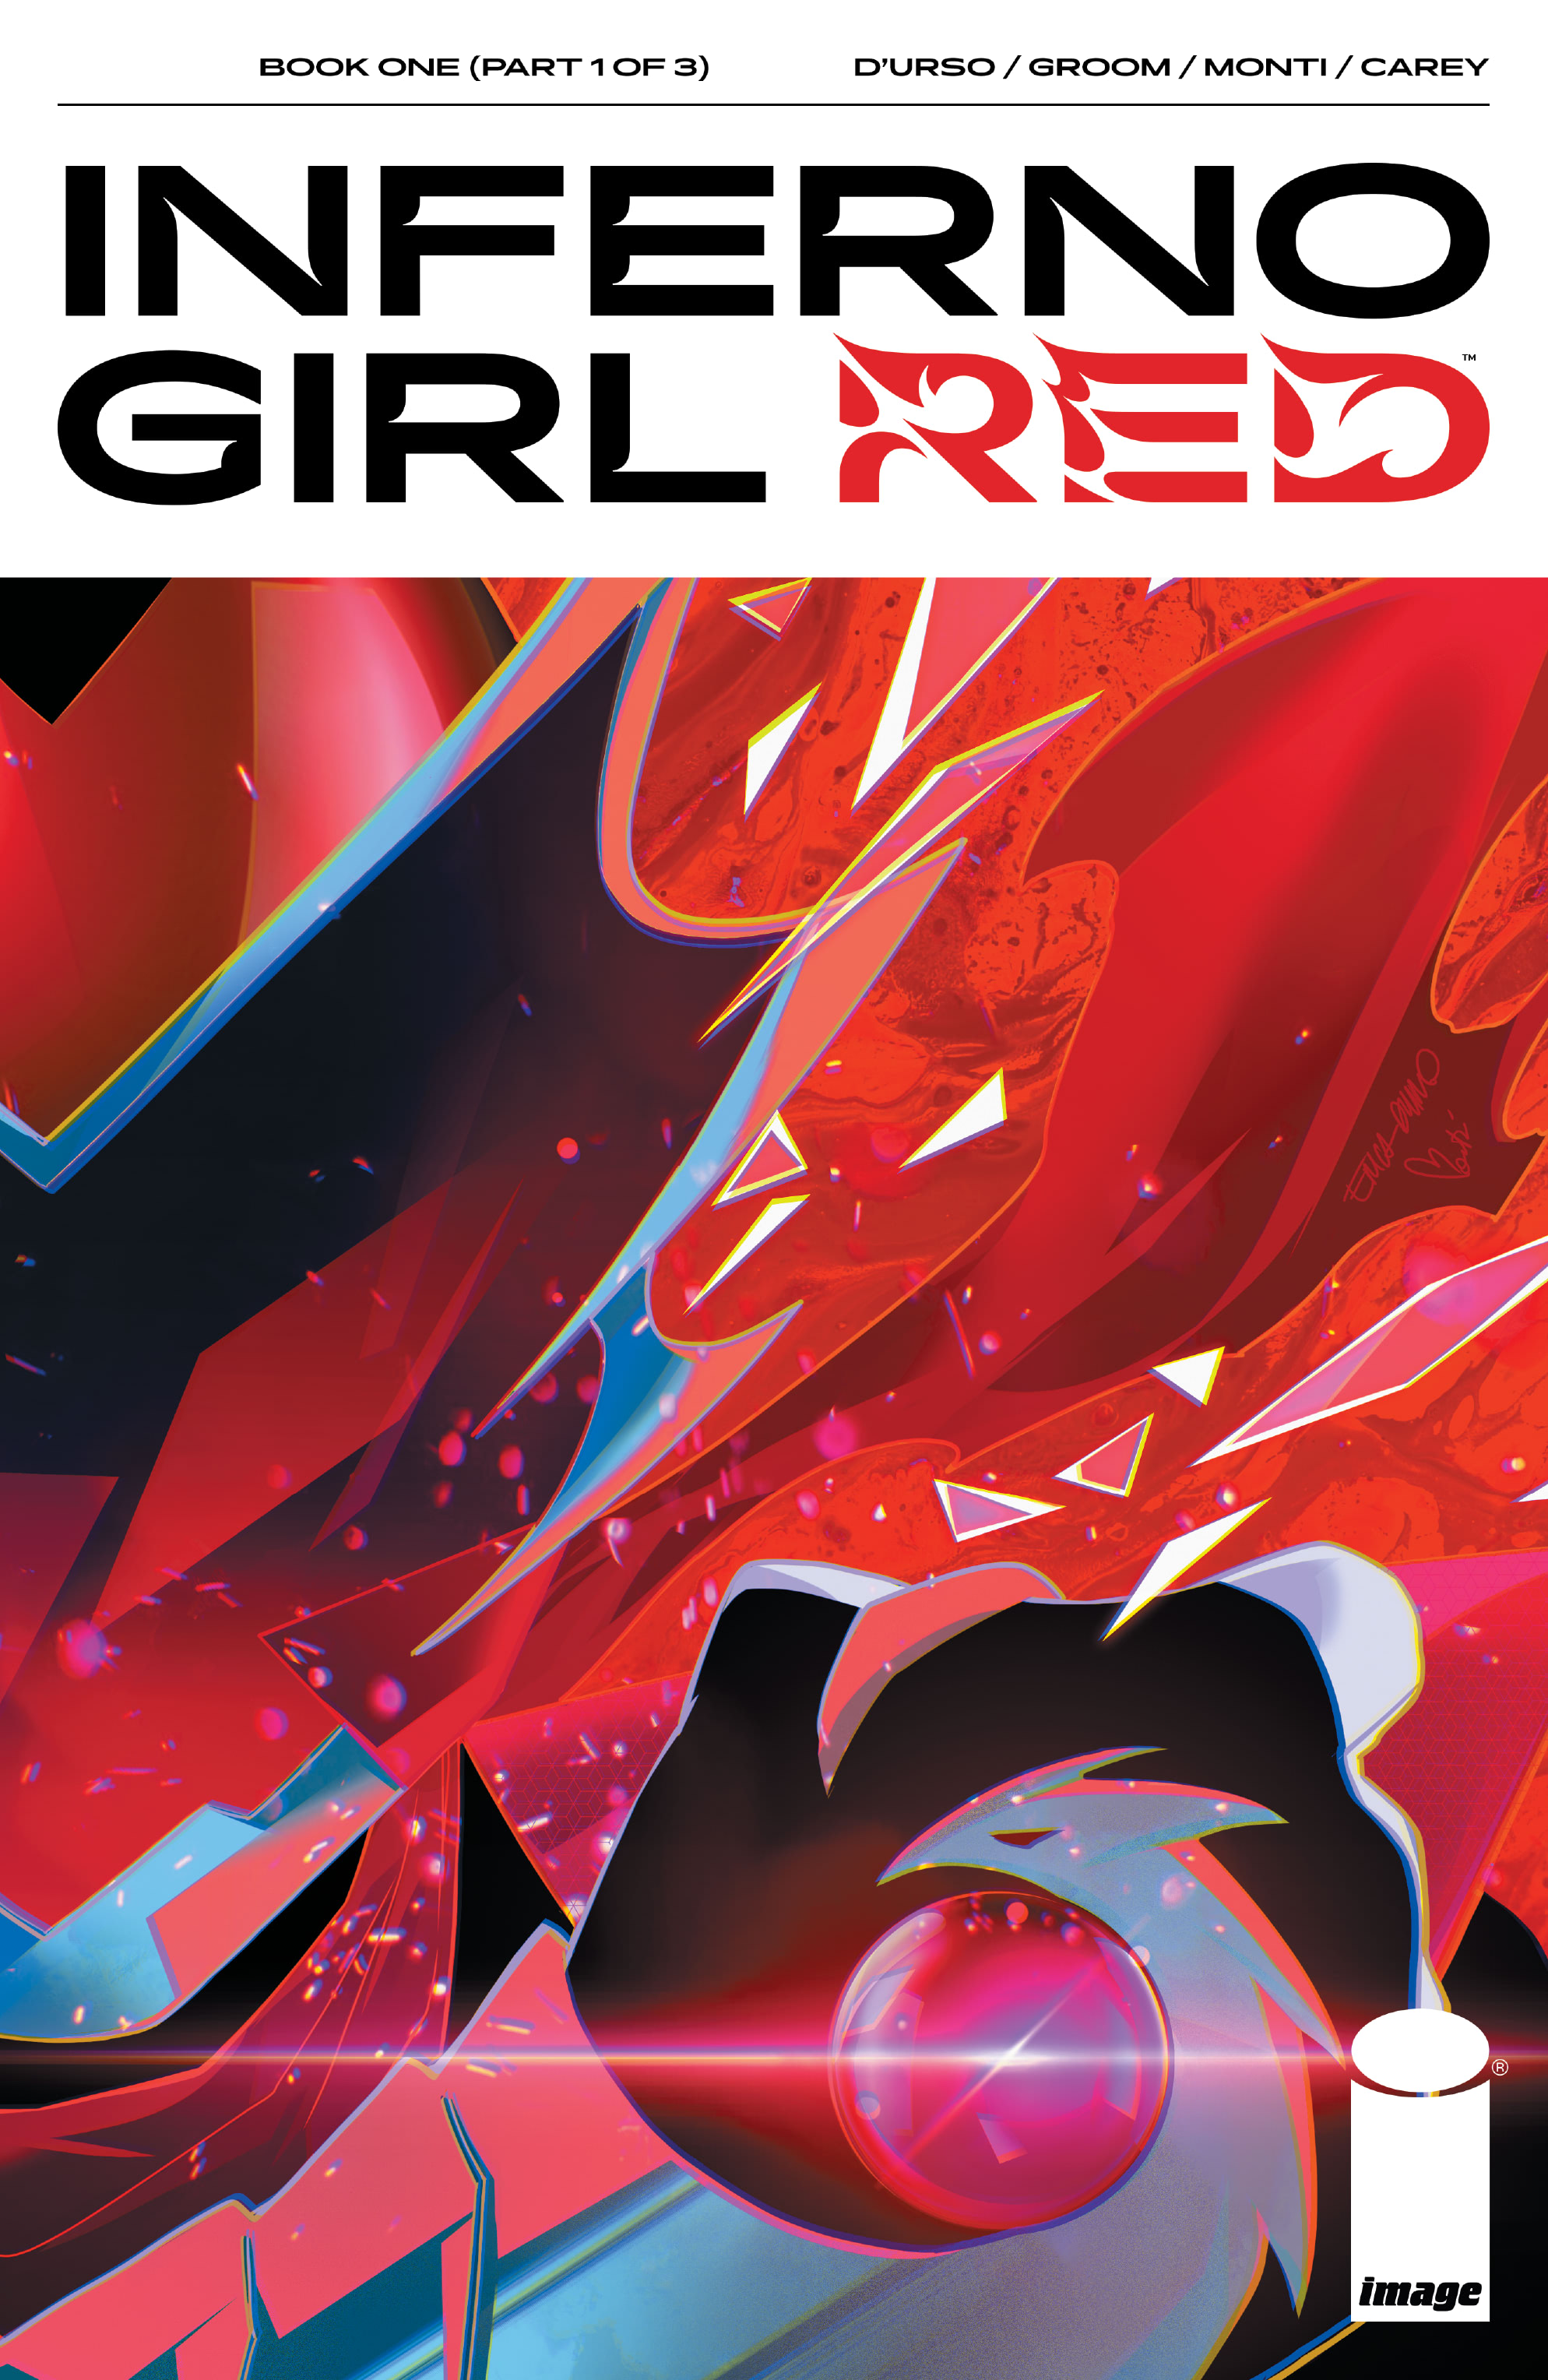 Read online Inferno Girl Red comic -  Issue #1 - 1